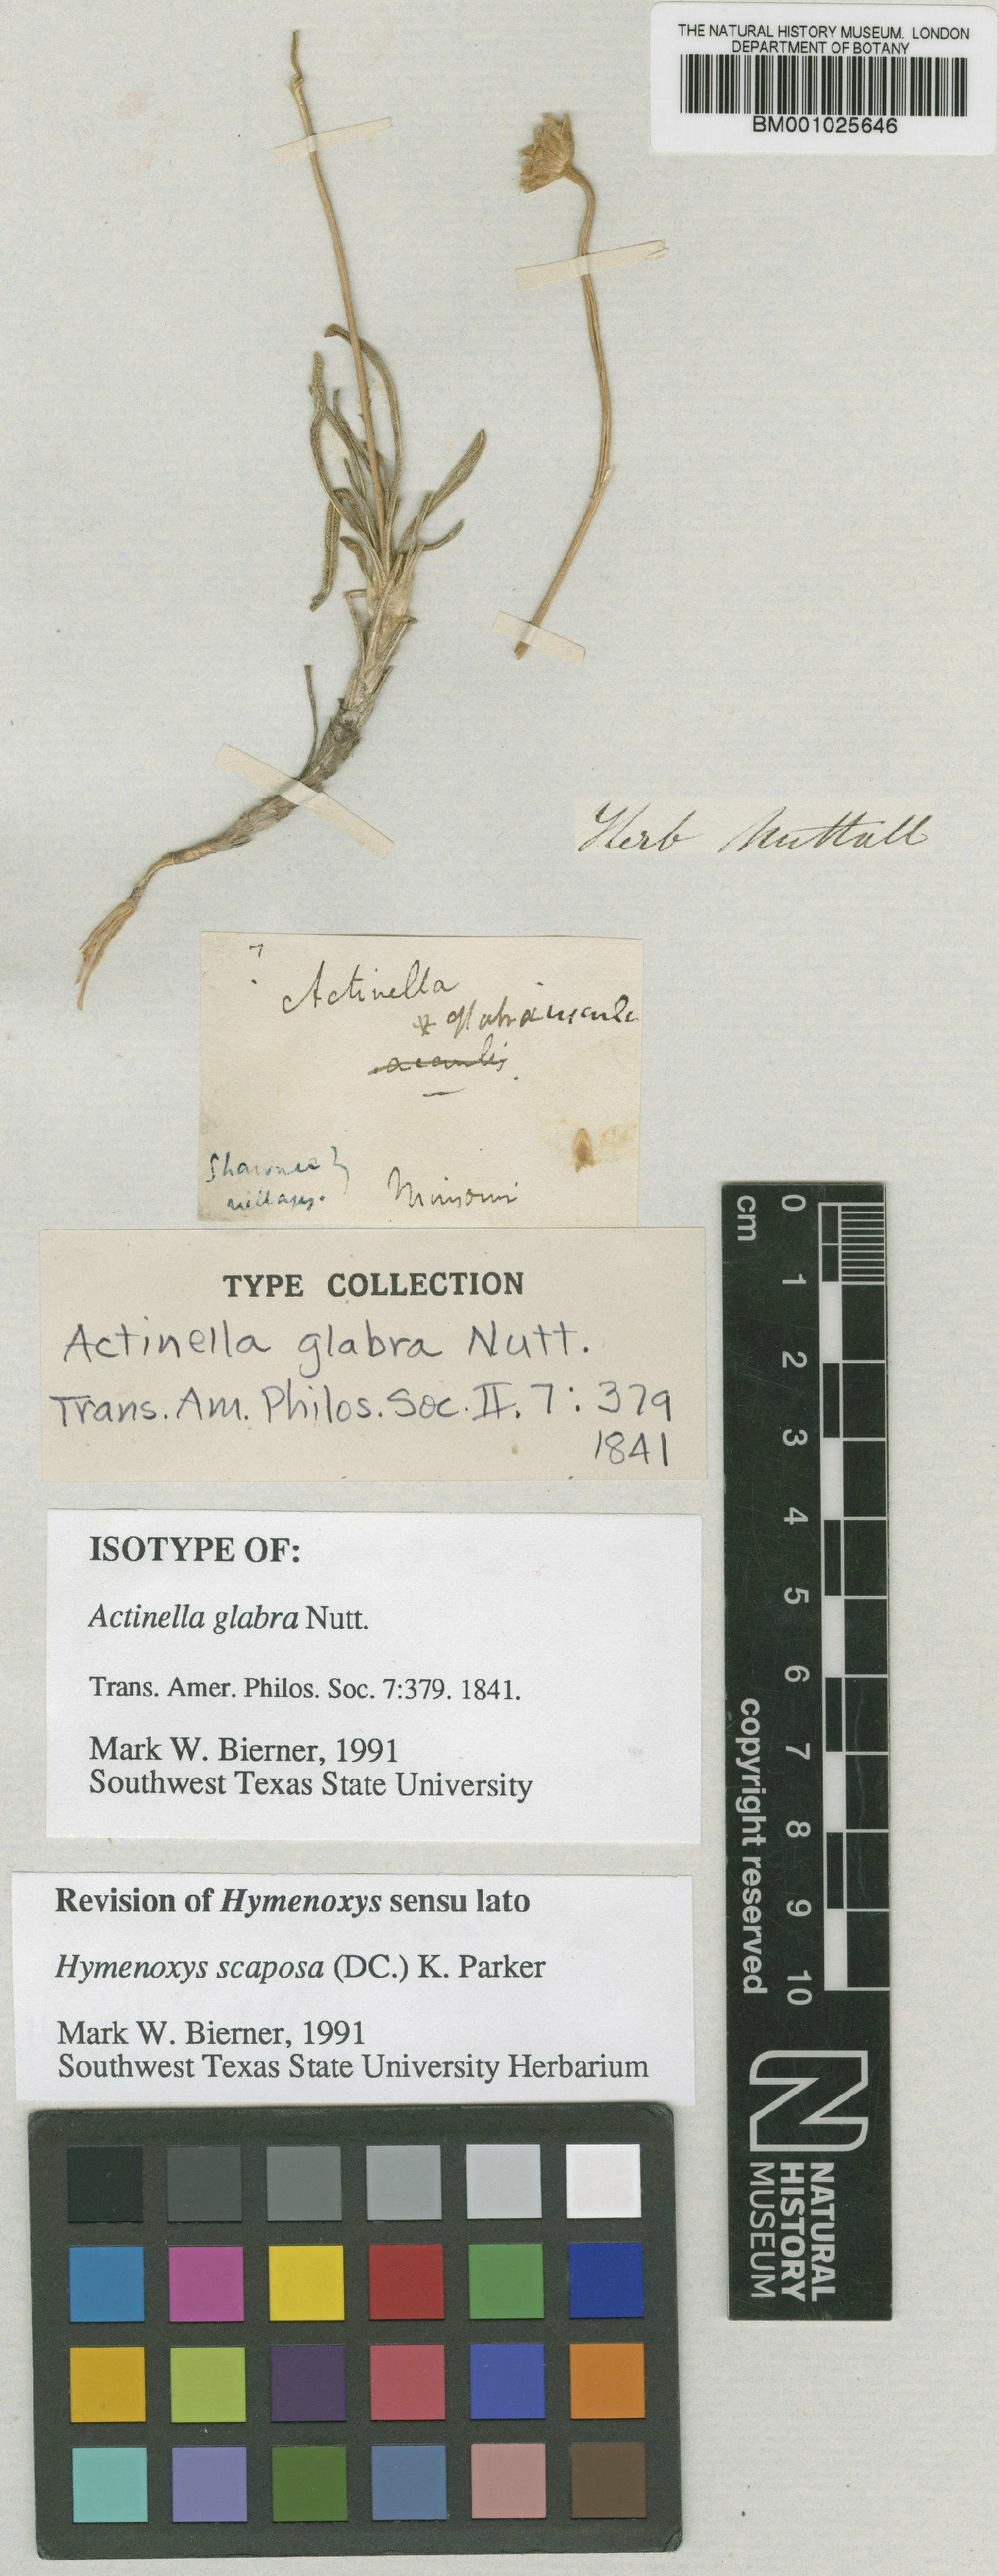 To NHMUK collection (Hymenoxys scaposa (DC.) Parker; Isotype; NHMUK:ecatalogue:1185993)